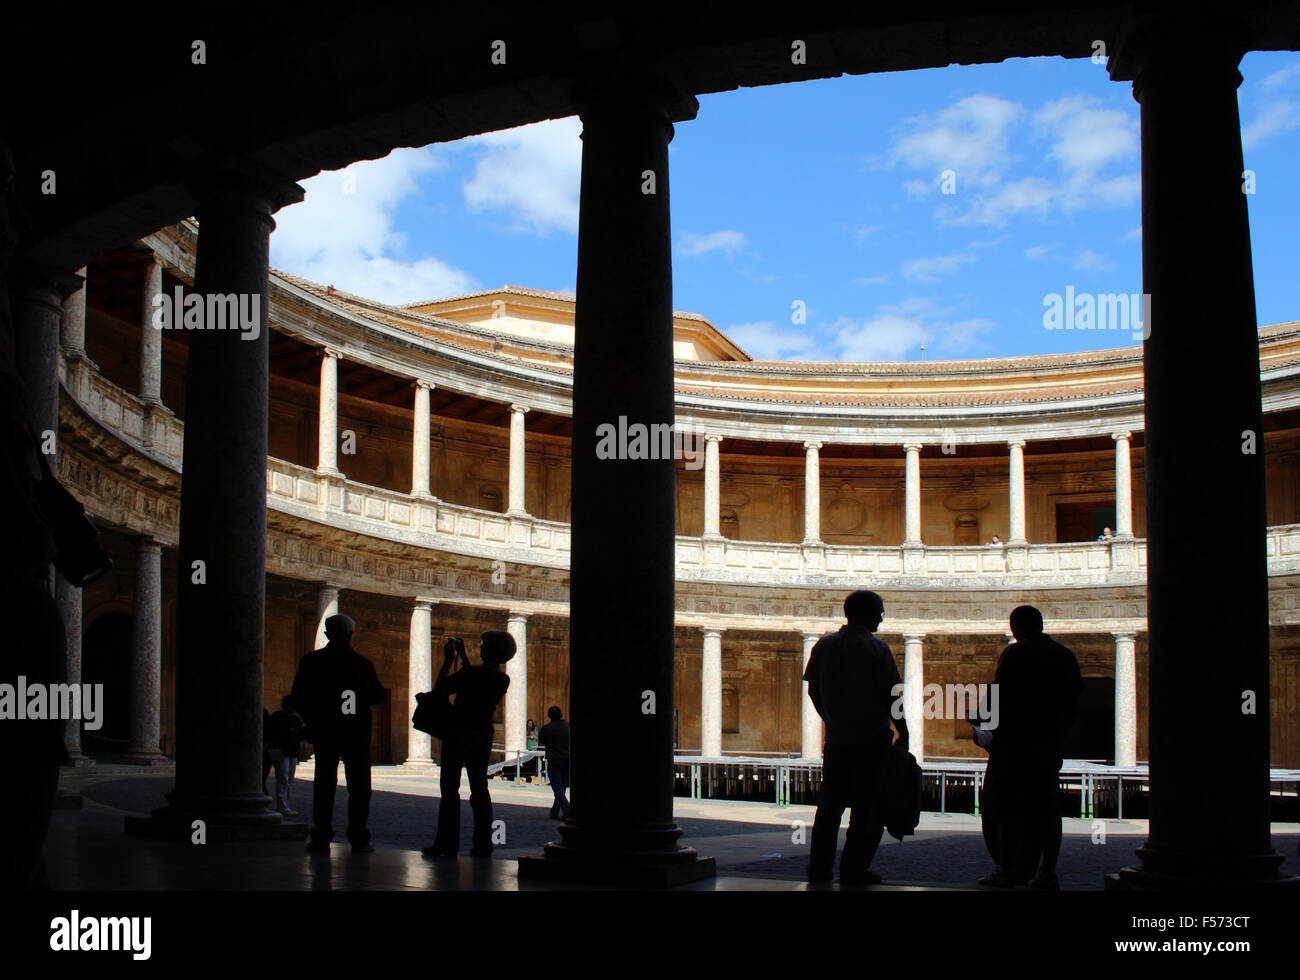 Royal Palace of Carlos V in La Alhambra.  Silhouettes over the circular patio of the palace. Stock Photo